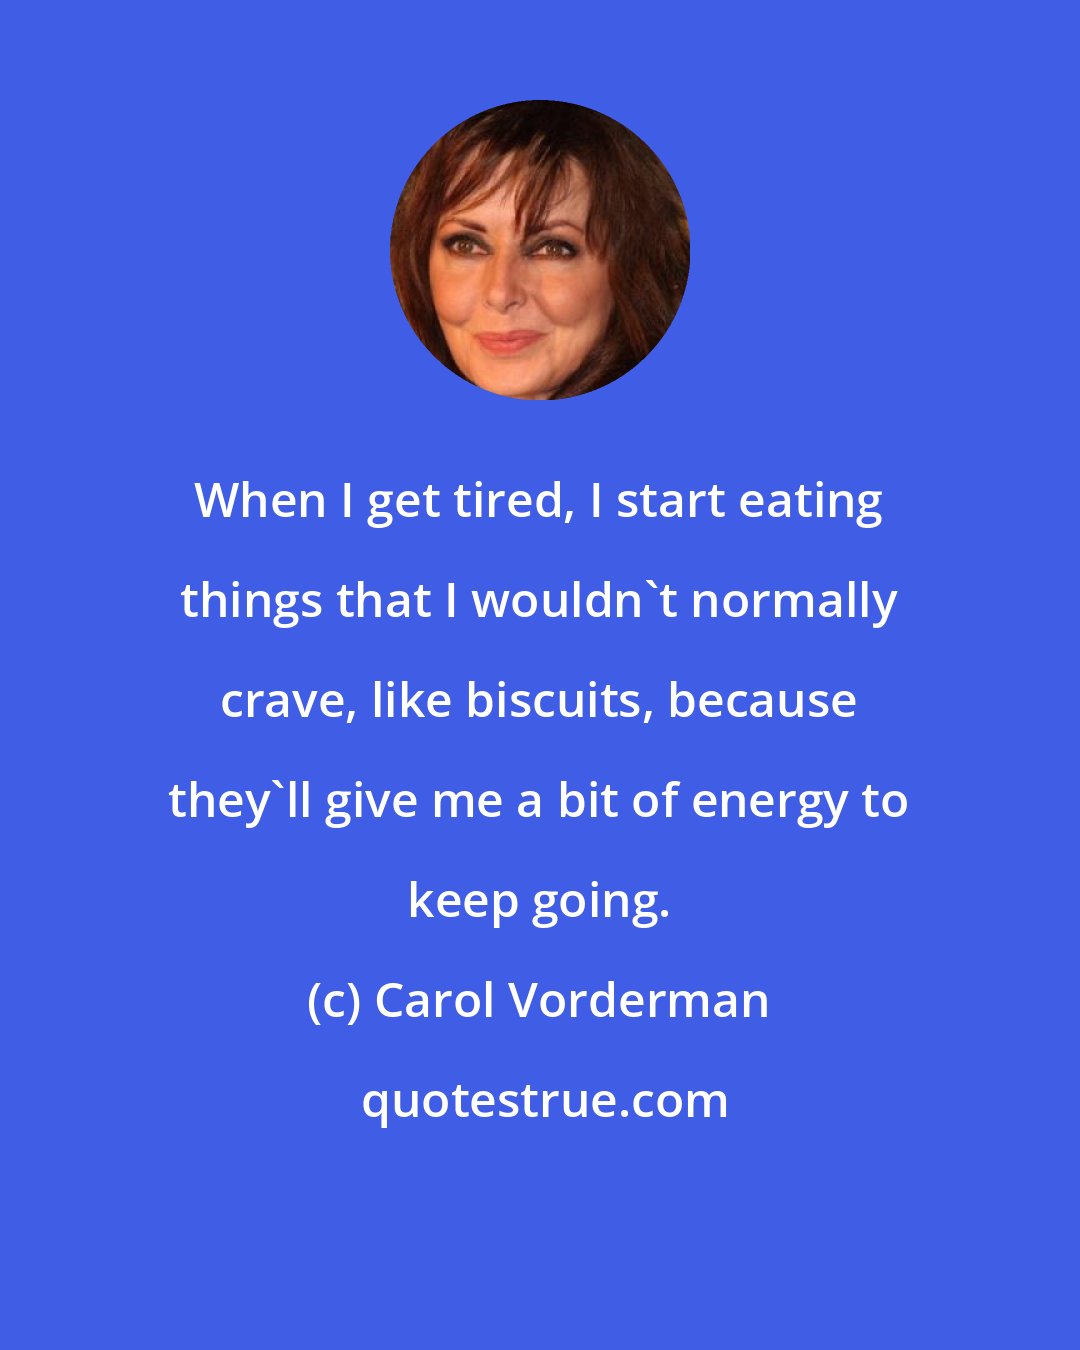 Carol Vorderman: When I get tired, I start eating things that I wouldn't normally crave, like biscuits, because they'll give me a bit of energy to keep going.